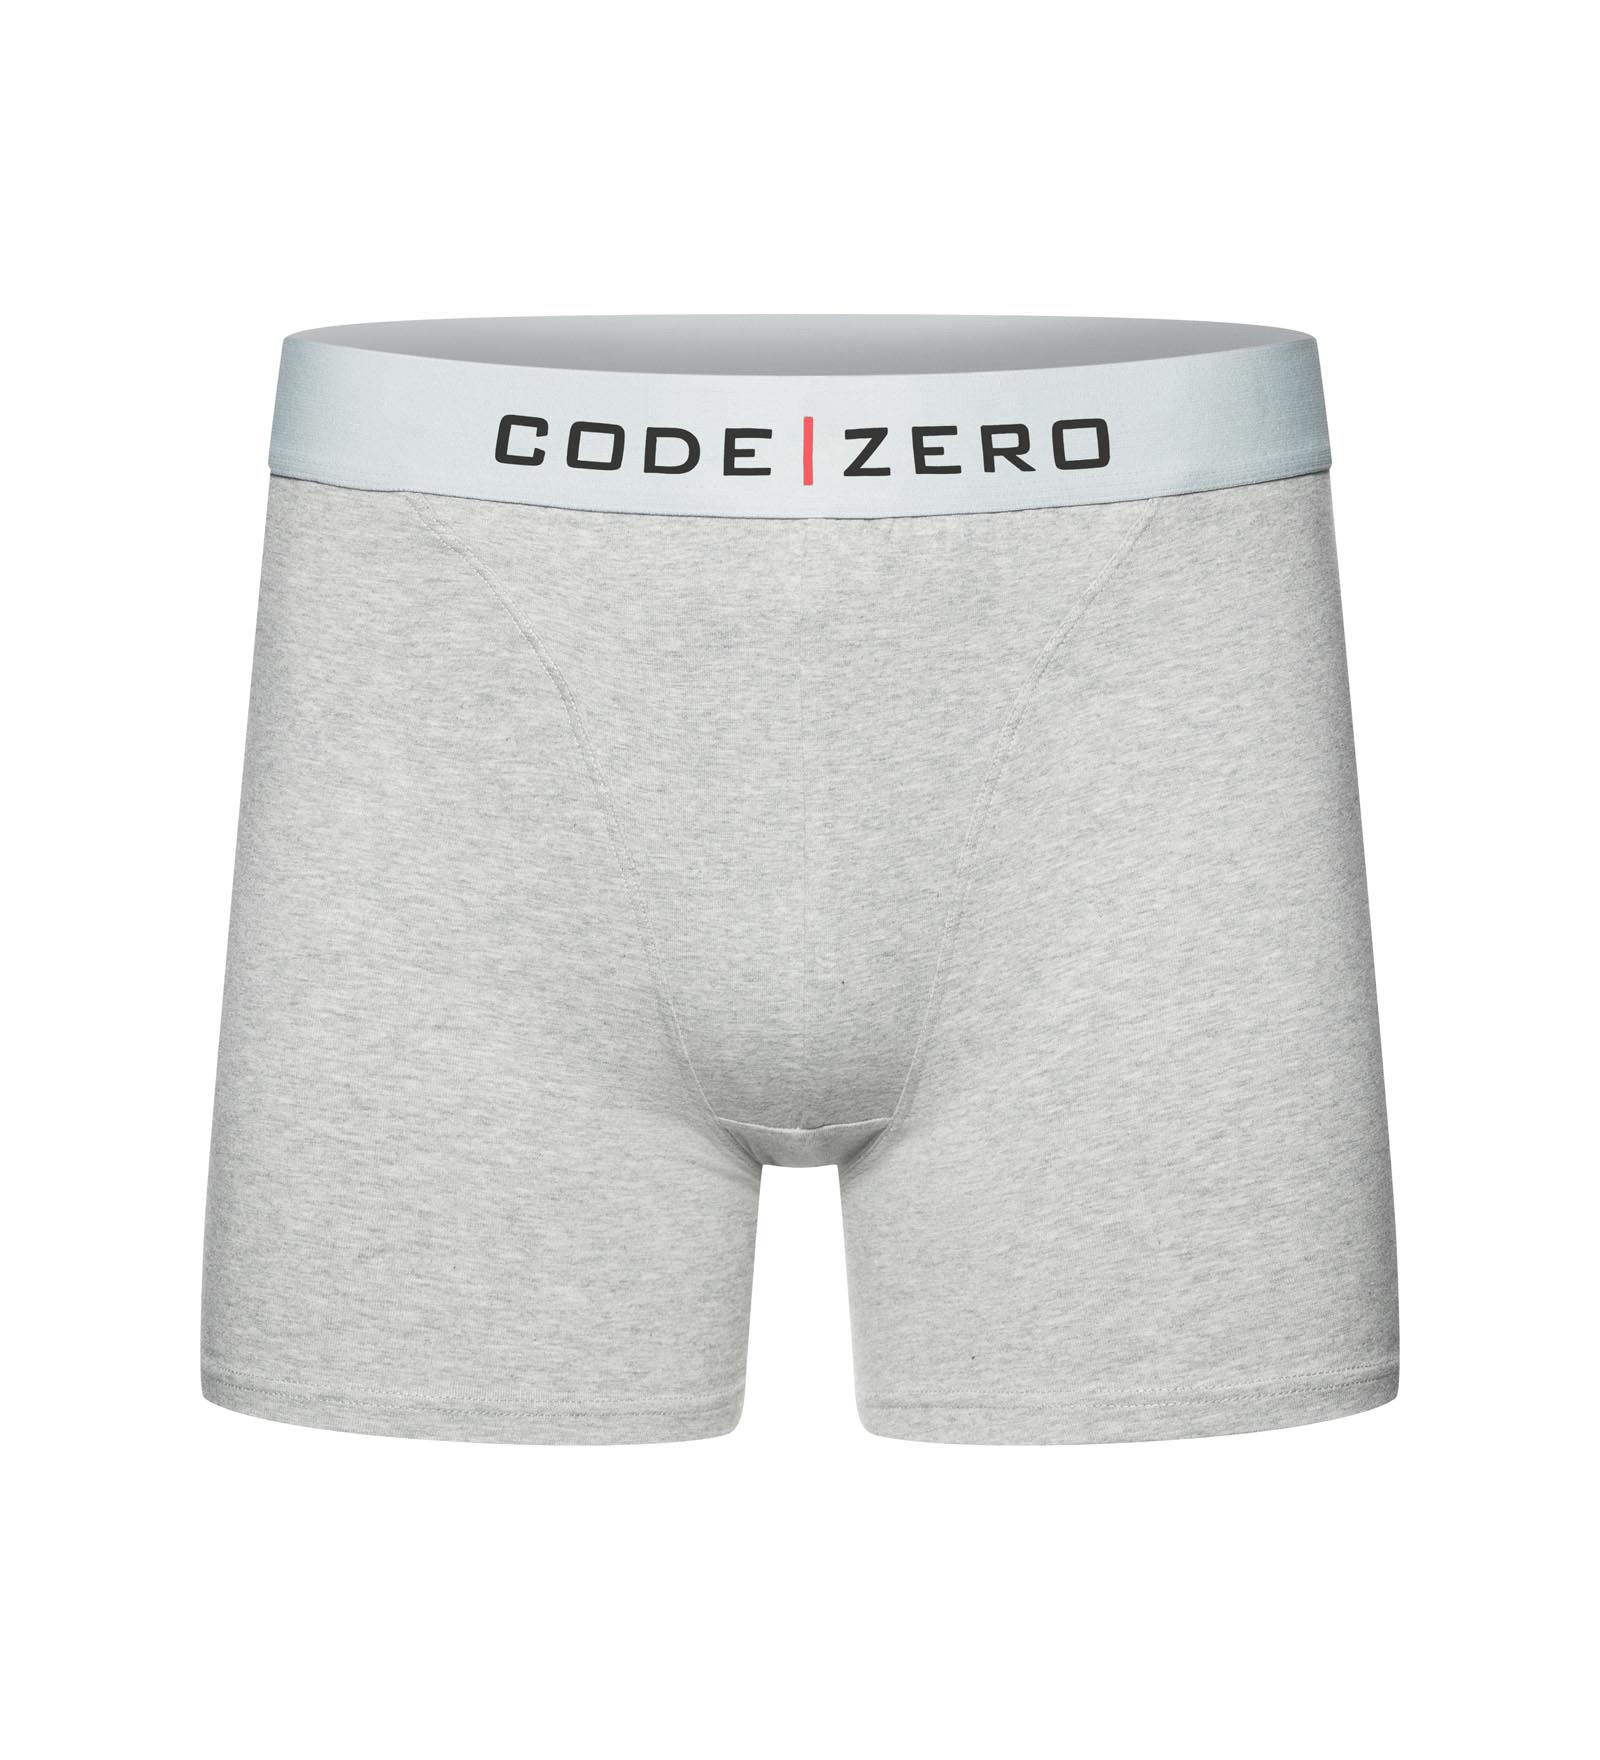 Custom Personalized Boxer Shorts with your Text or Image - ABC